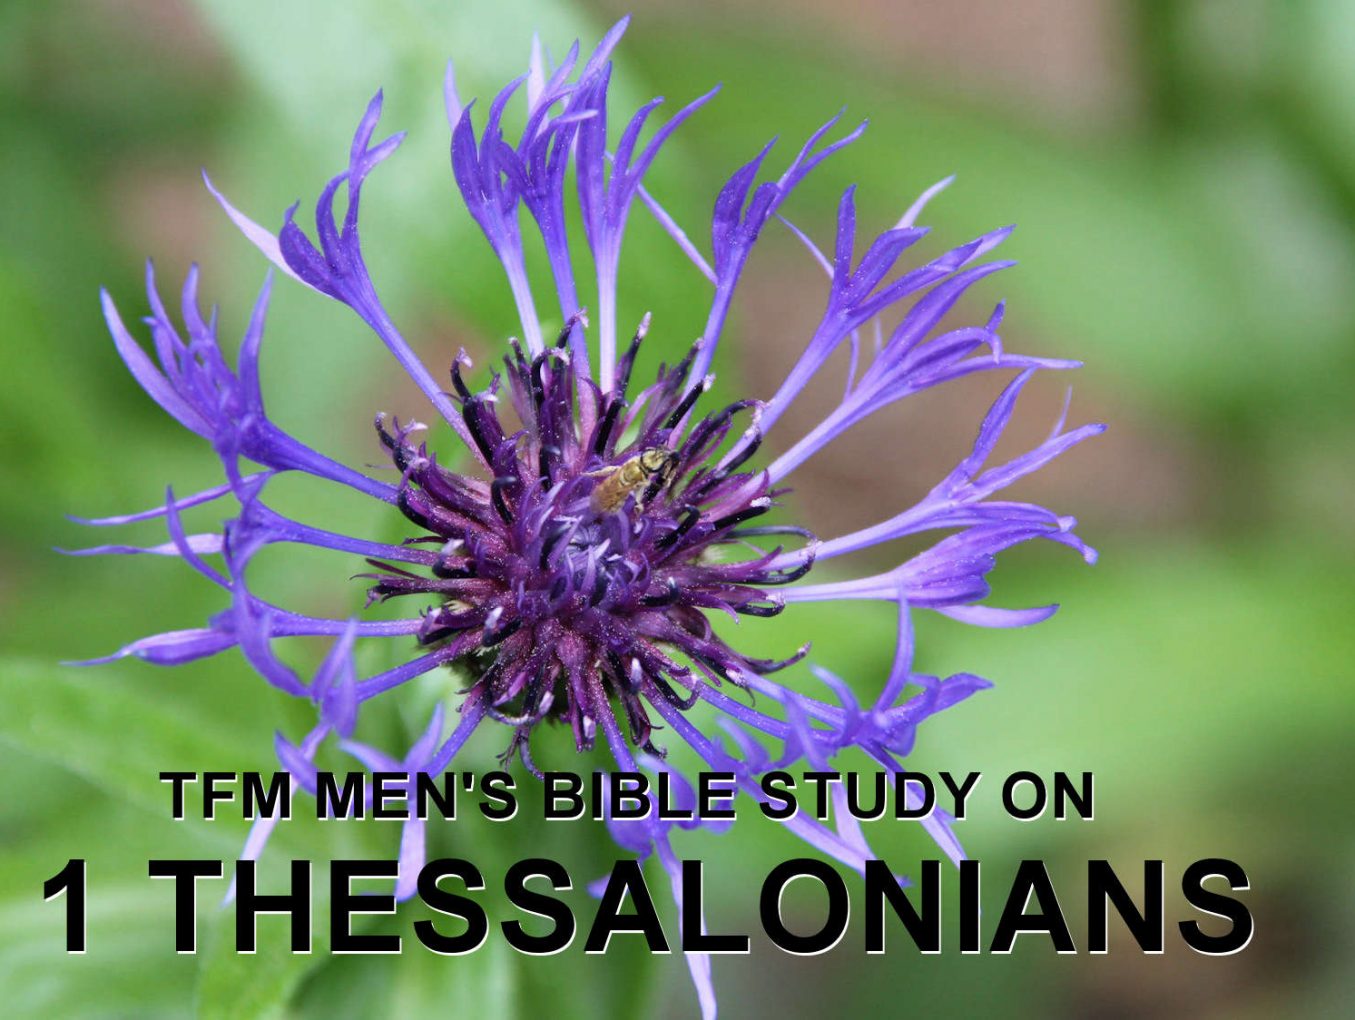 Men's Bible Study on 1 THESSALONIANS (2014-06-03 to 2014-07-01)